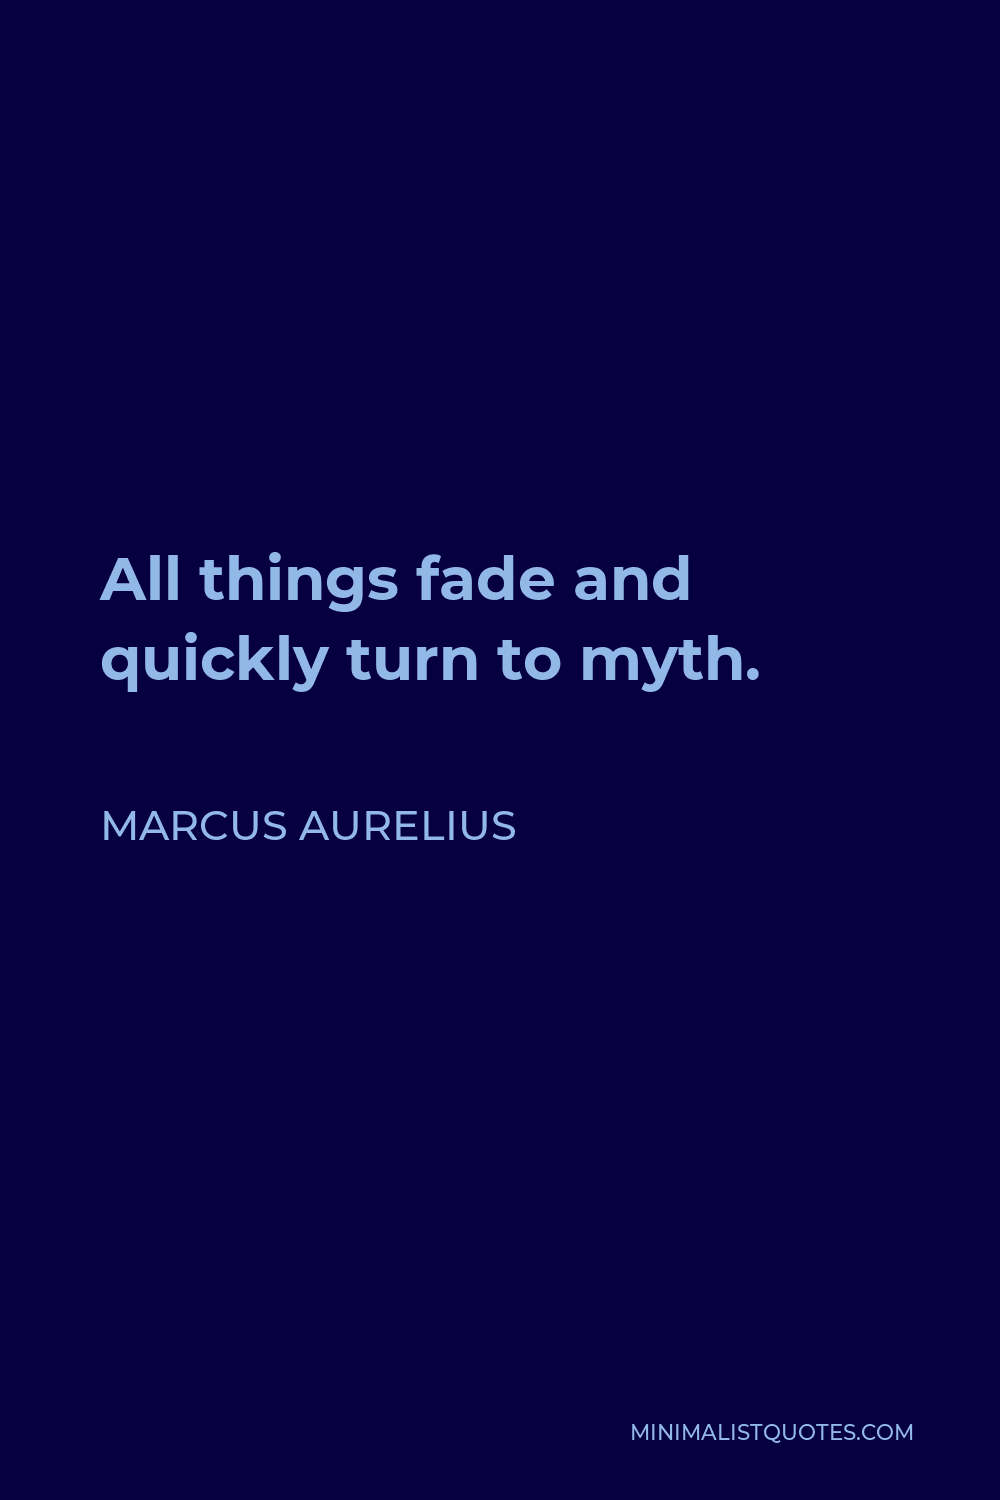 Marcus Aurelius Quote - All things fade and quickly turn to myth.